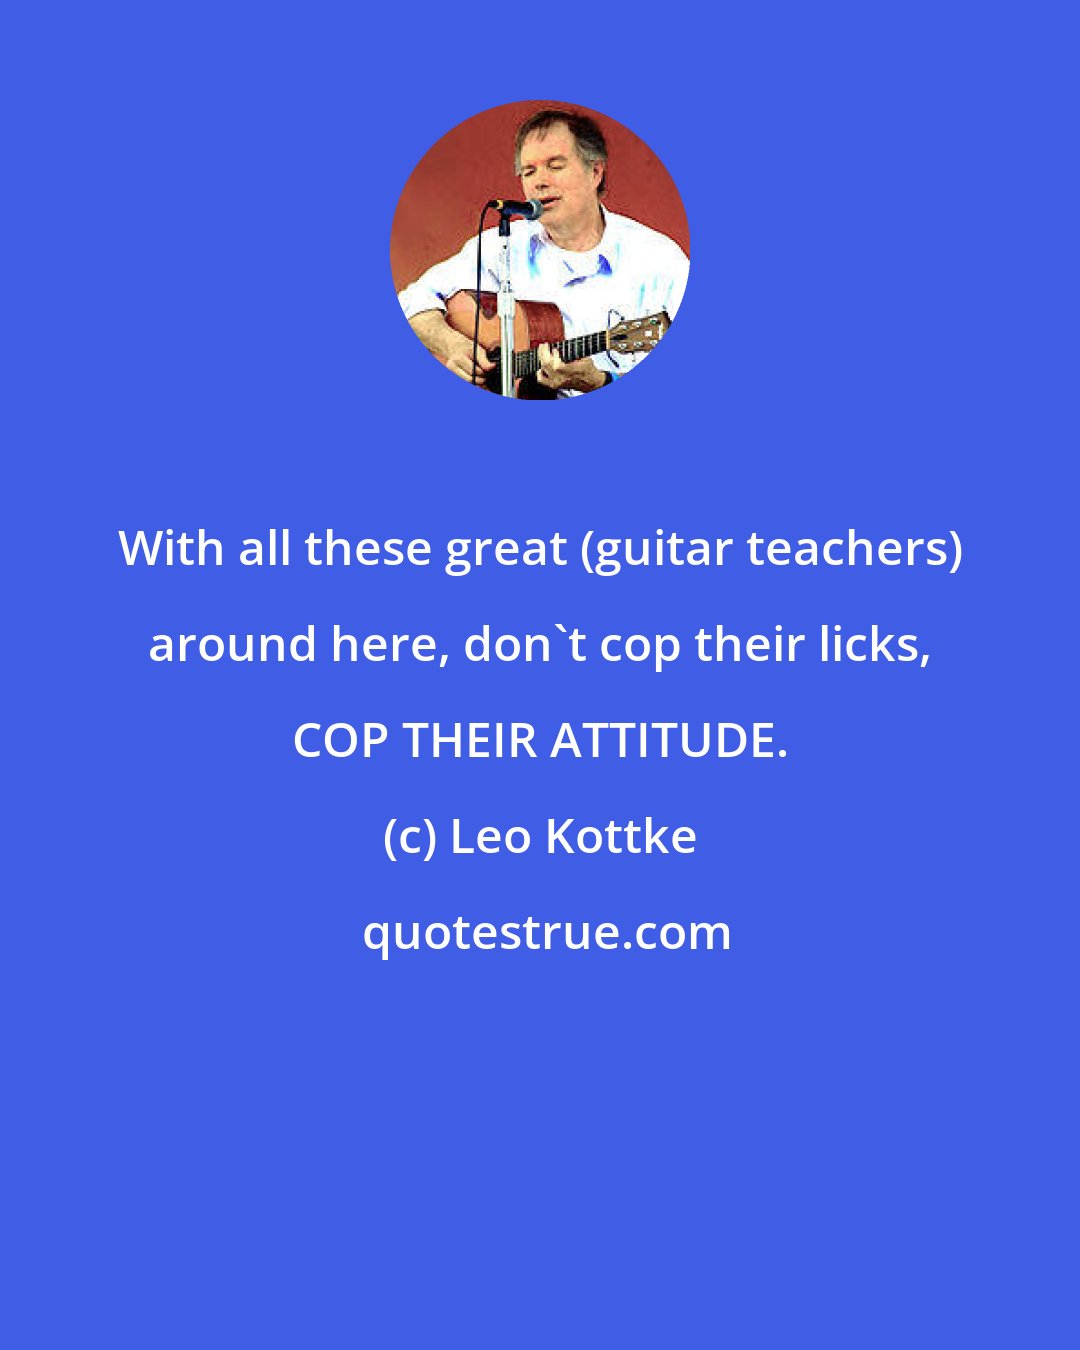 Leo Kottke: With all these great (guitar teachers) around here, don't cop their licks, COP THEIR ATTITUDE.